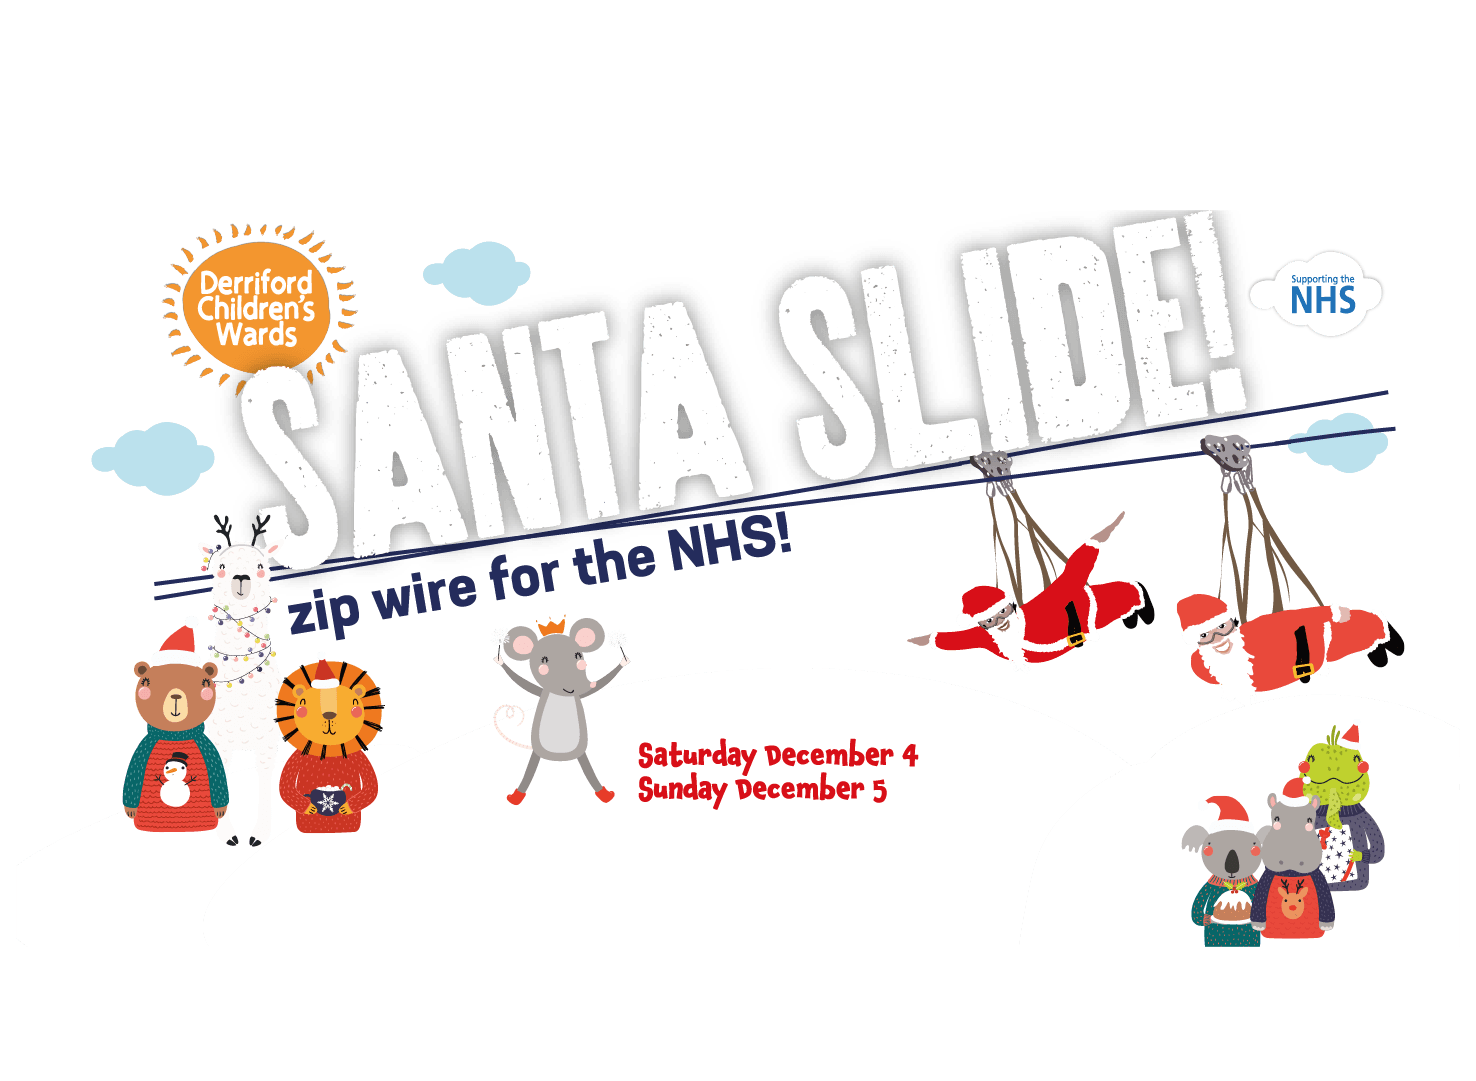 Santa Slide banner, with Derriford Children's Wards logo, and the NHS logo. Two Santa figures fly down a zipwire under the name